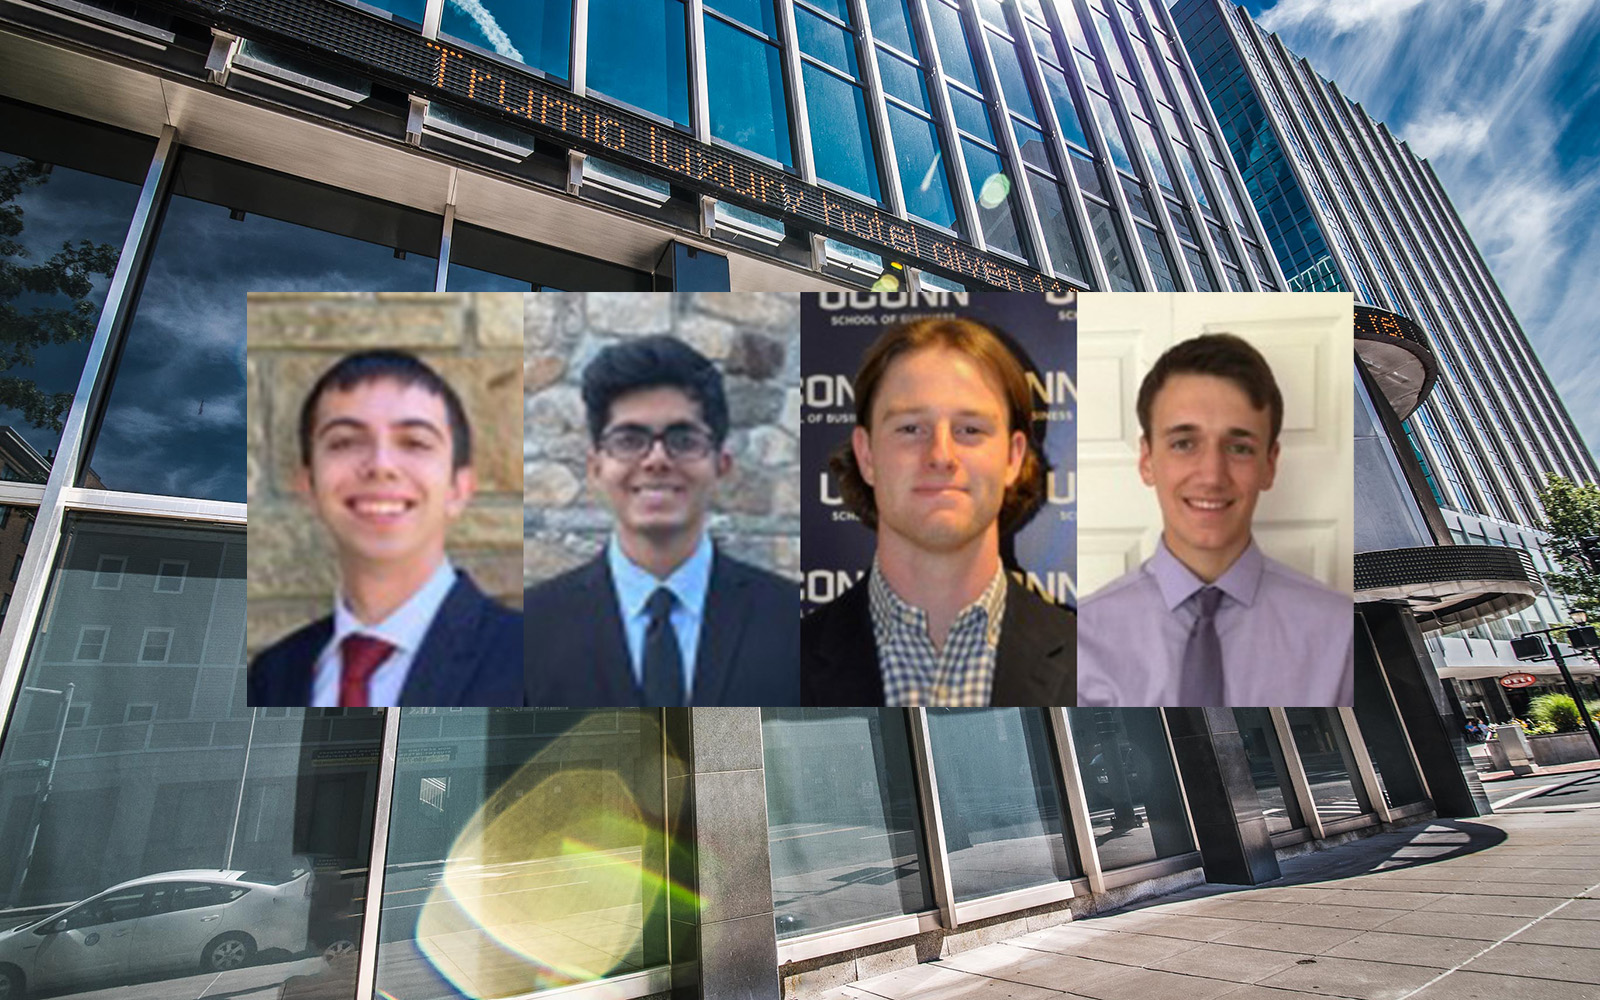 Left to right: Students Devin Stachelsky, Dhanush Kotumraju, Jackson Seymour and Ben Armstrong (Contributed Photos)